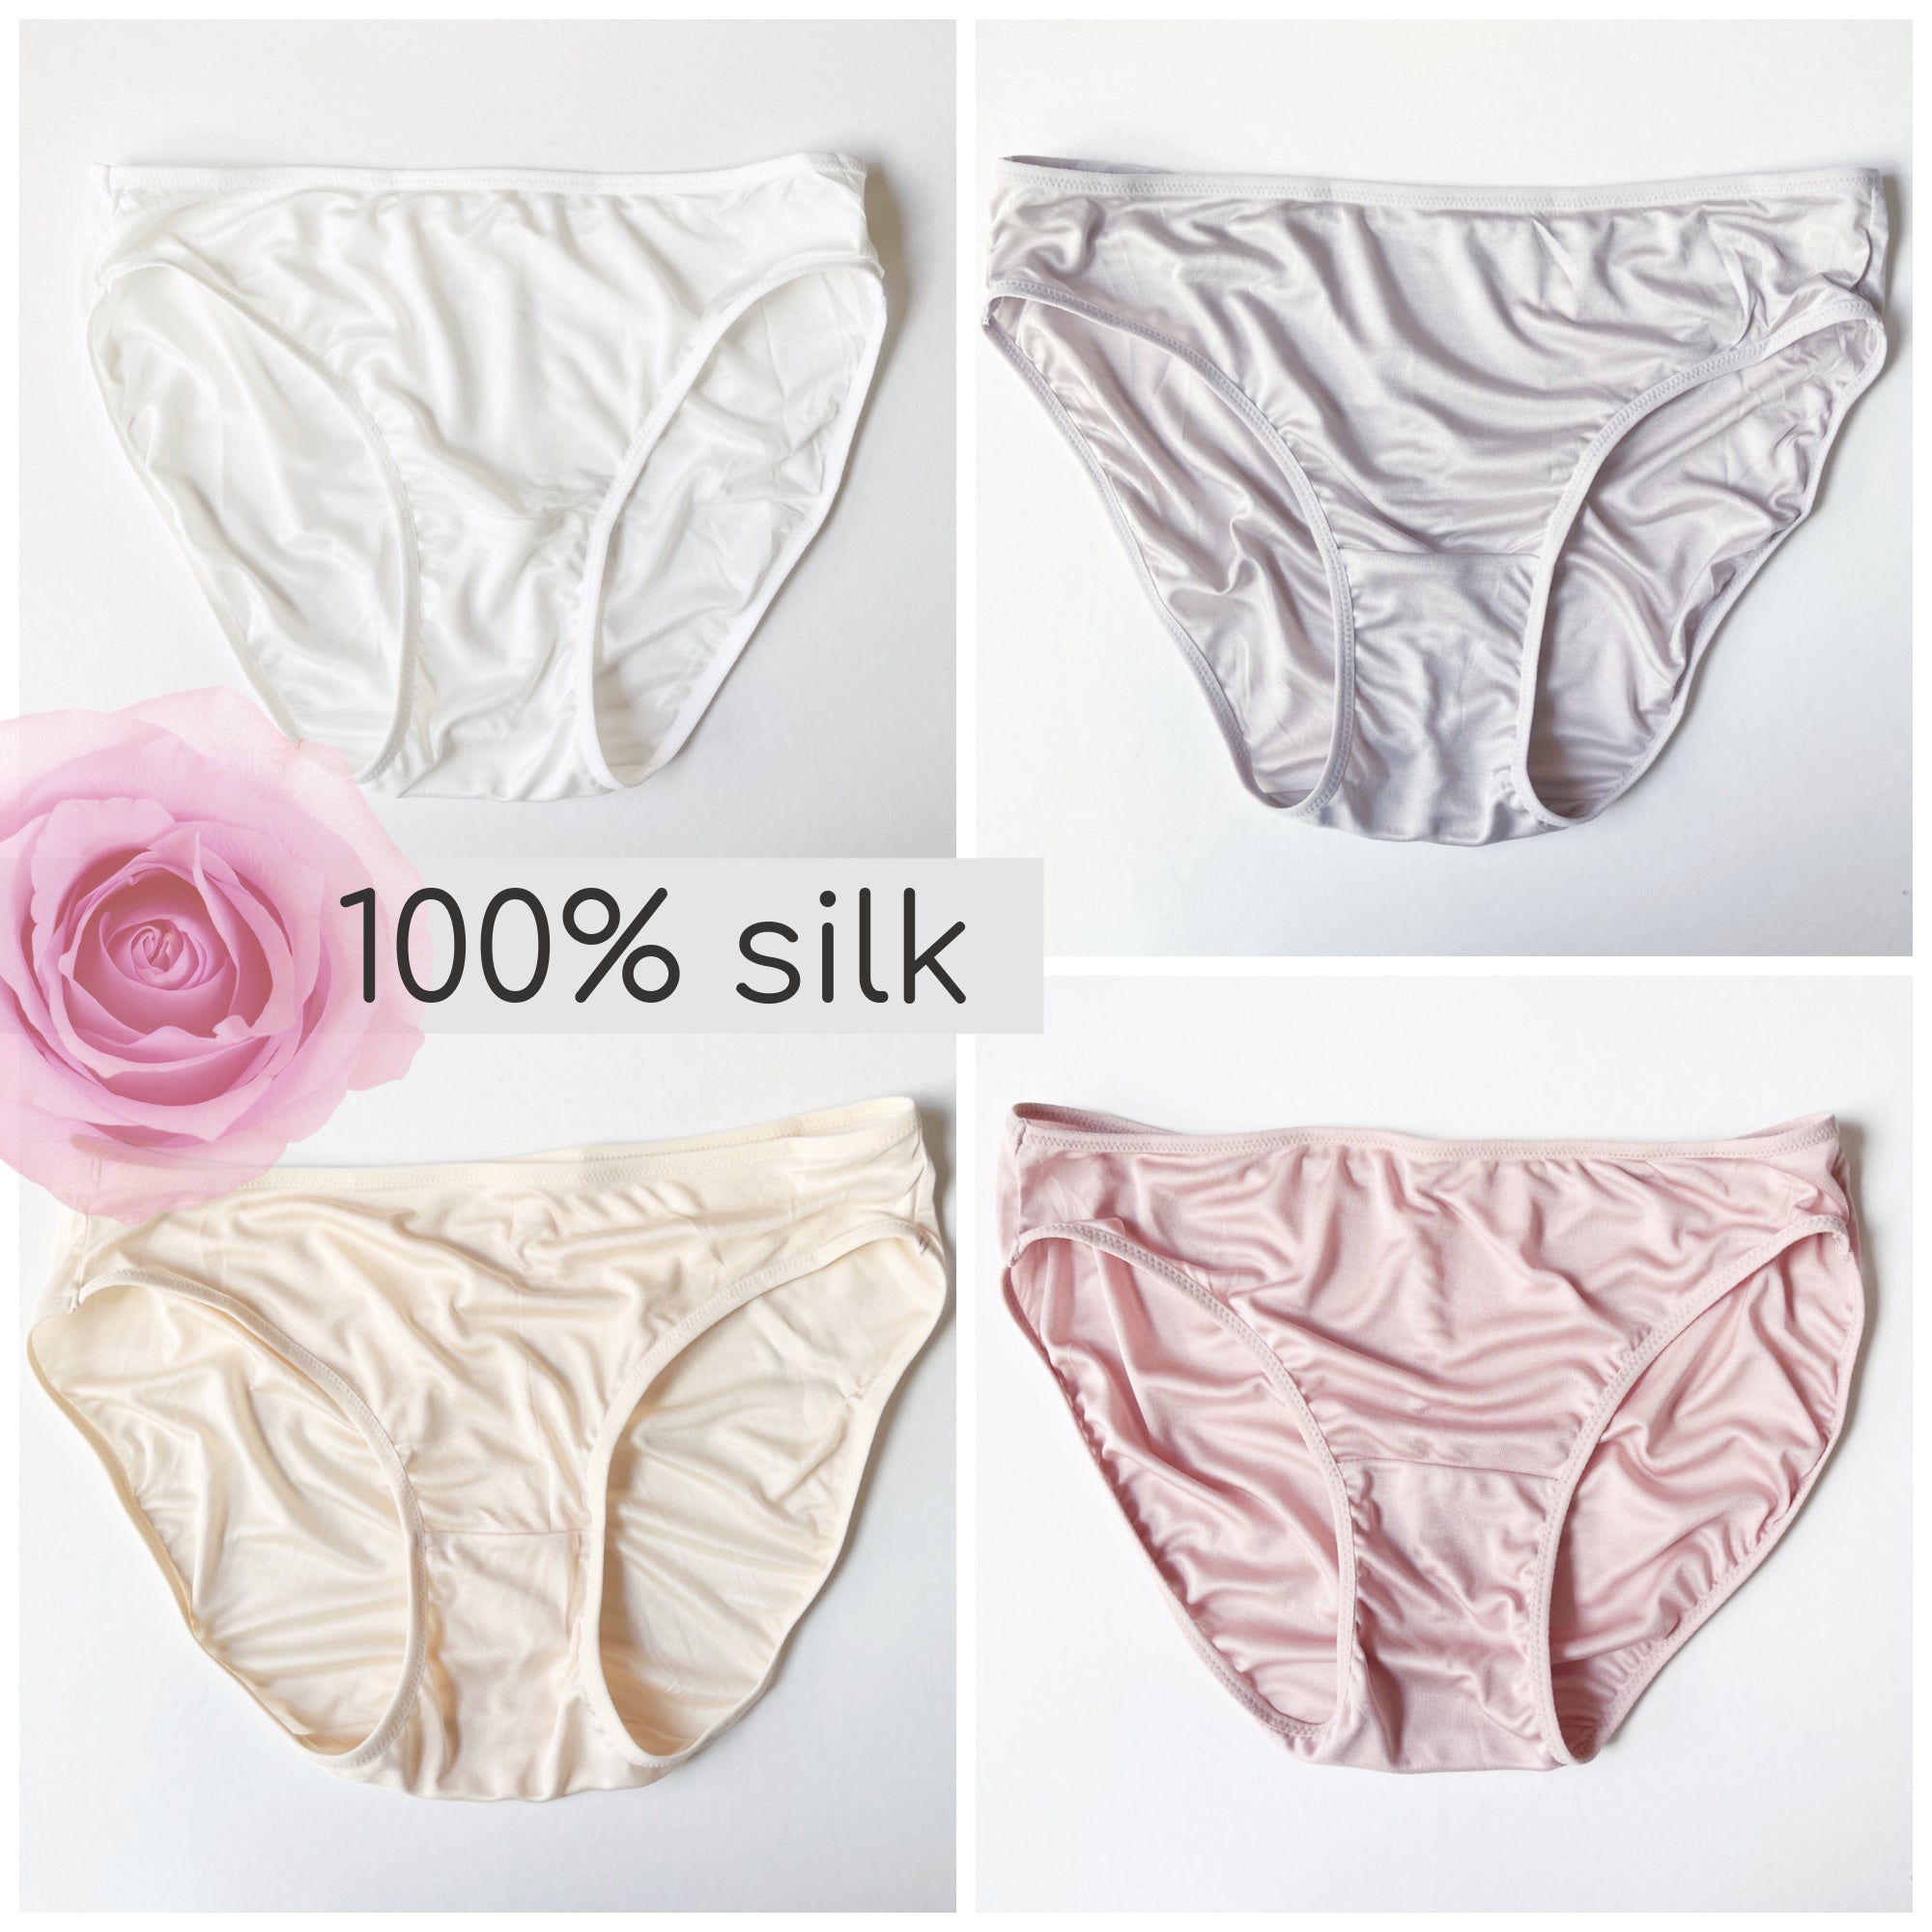 Silk, cotton and more: 5 Types of used panties you could consider selling  online - snifffr